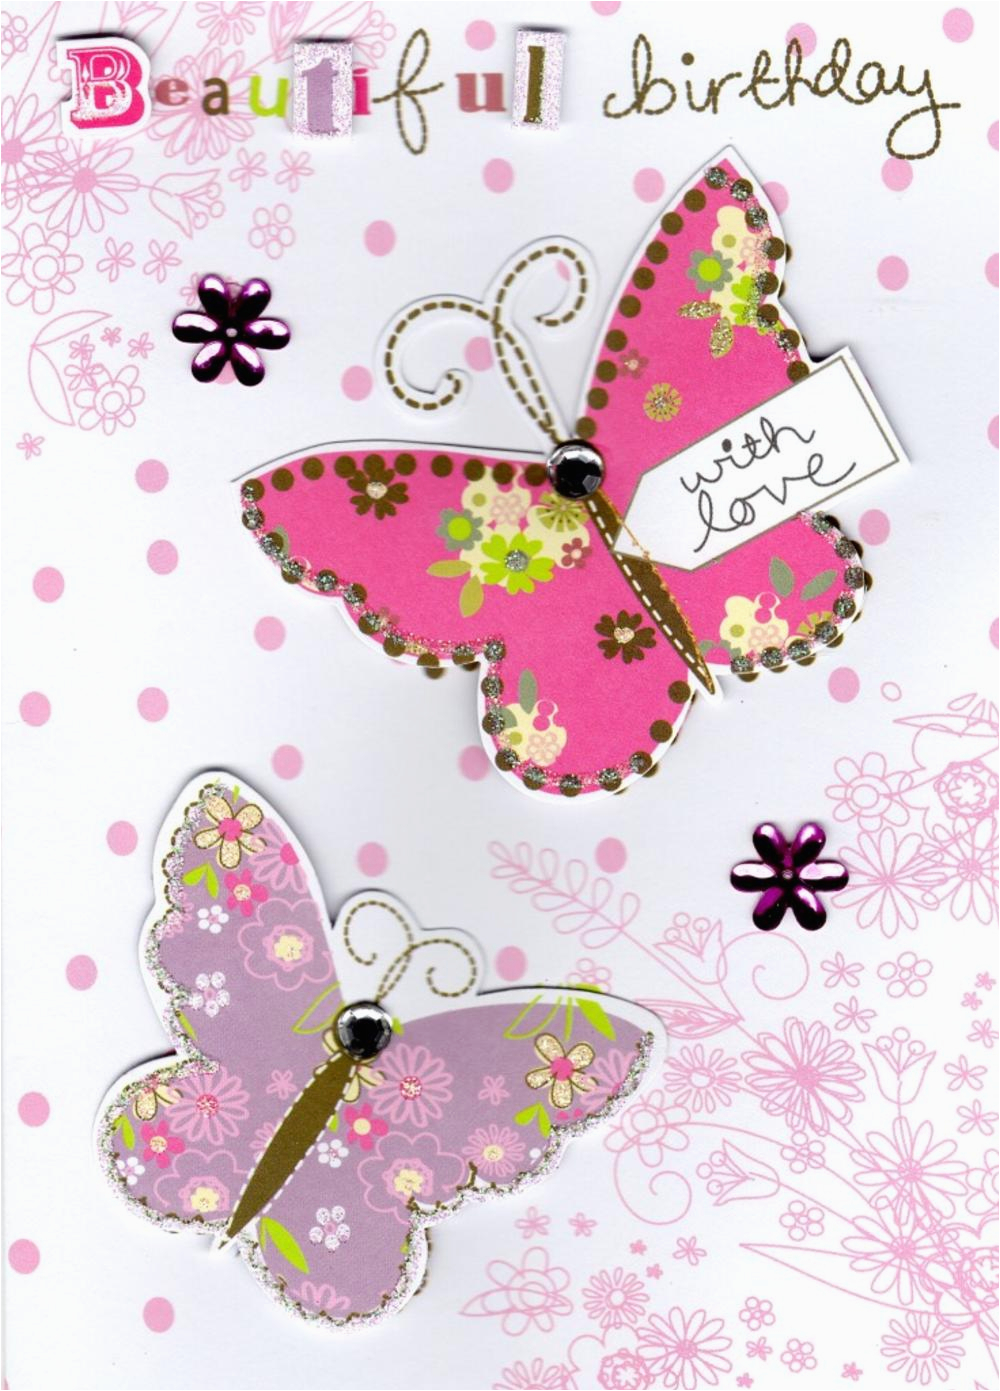 kcsnhta020 beautiful butterfly handmade birthday card second nature tag art greeting cards